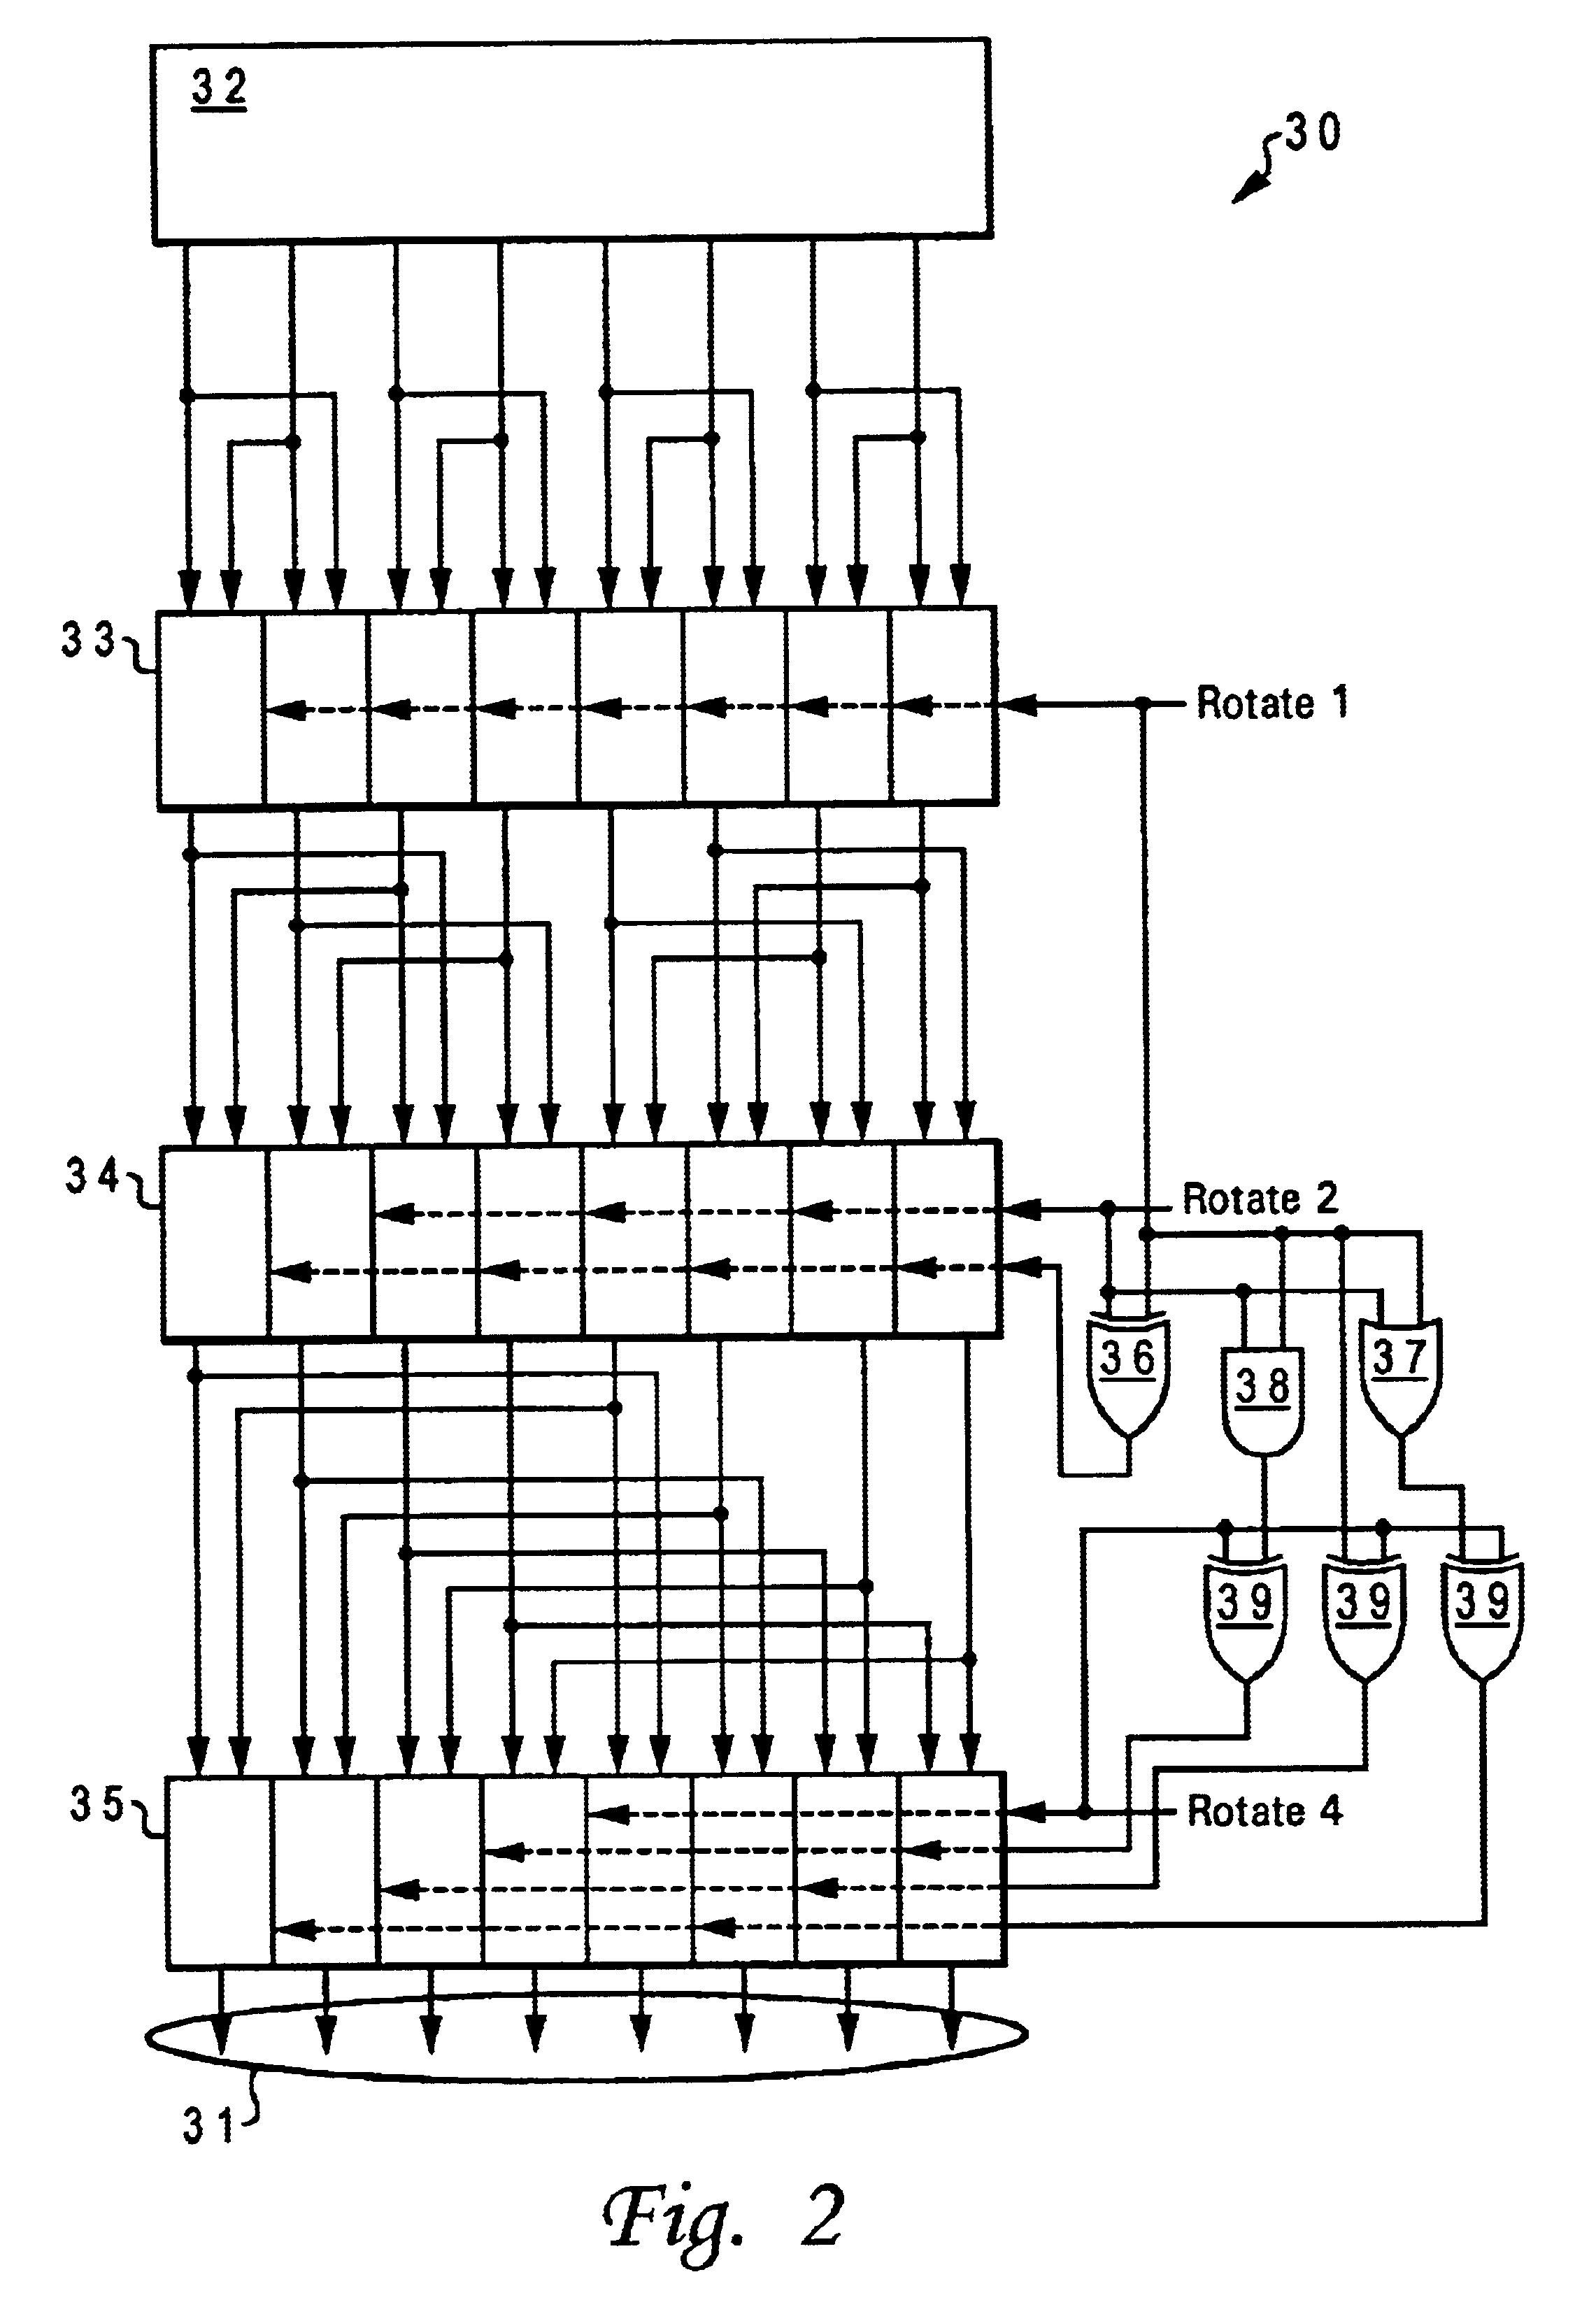 Method and apparatus for performing rotate operations using cascaded multiplexers